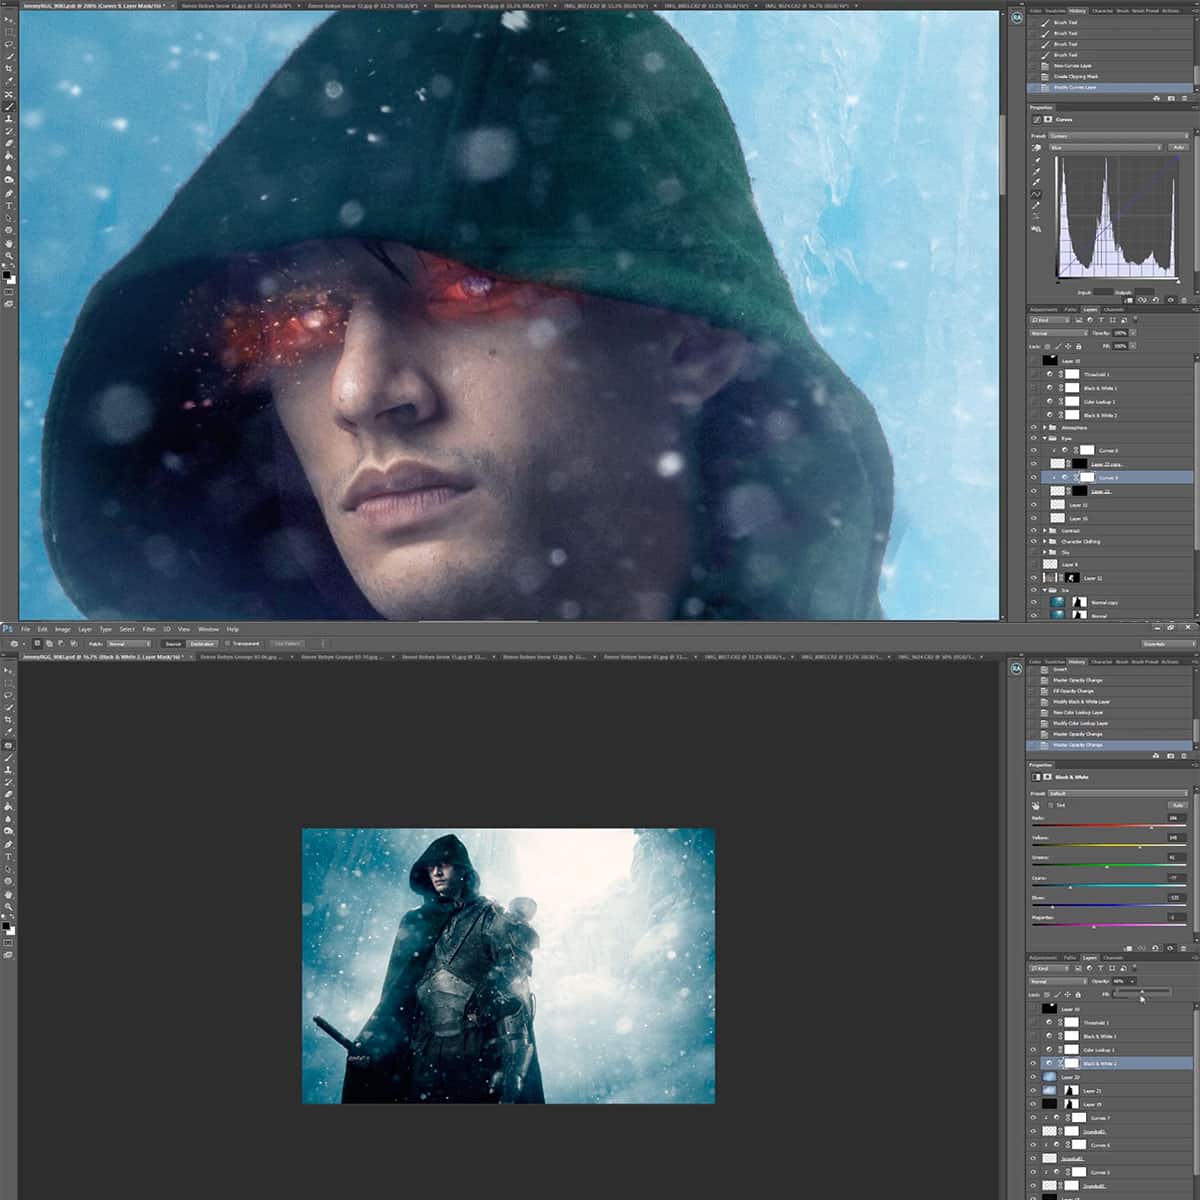 Learn Compositing in Adobe Photoshop cc